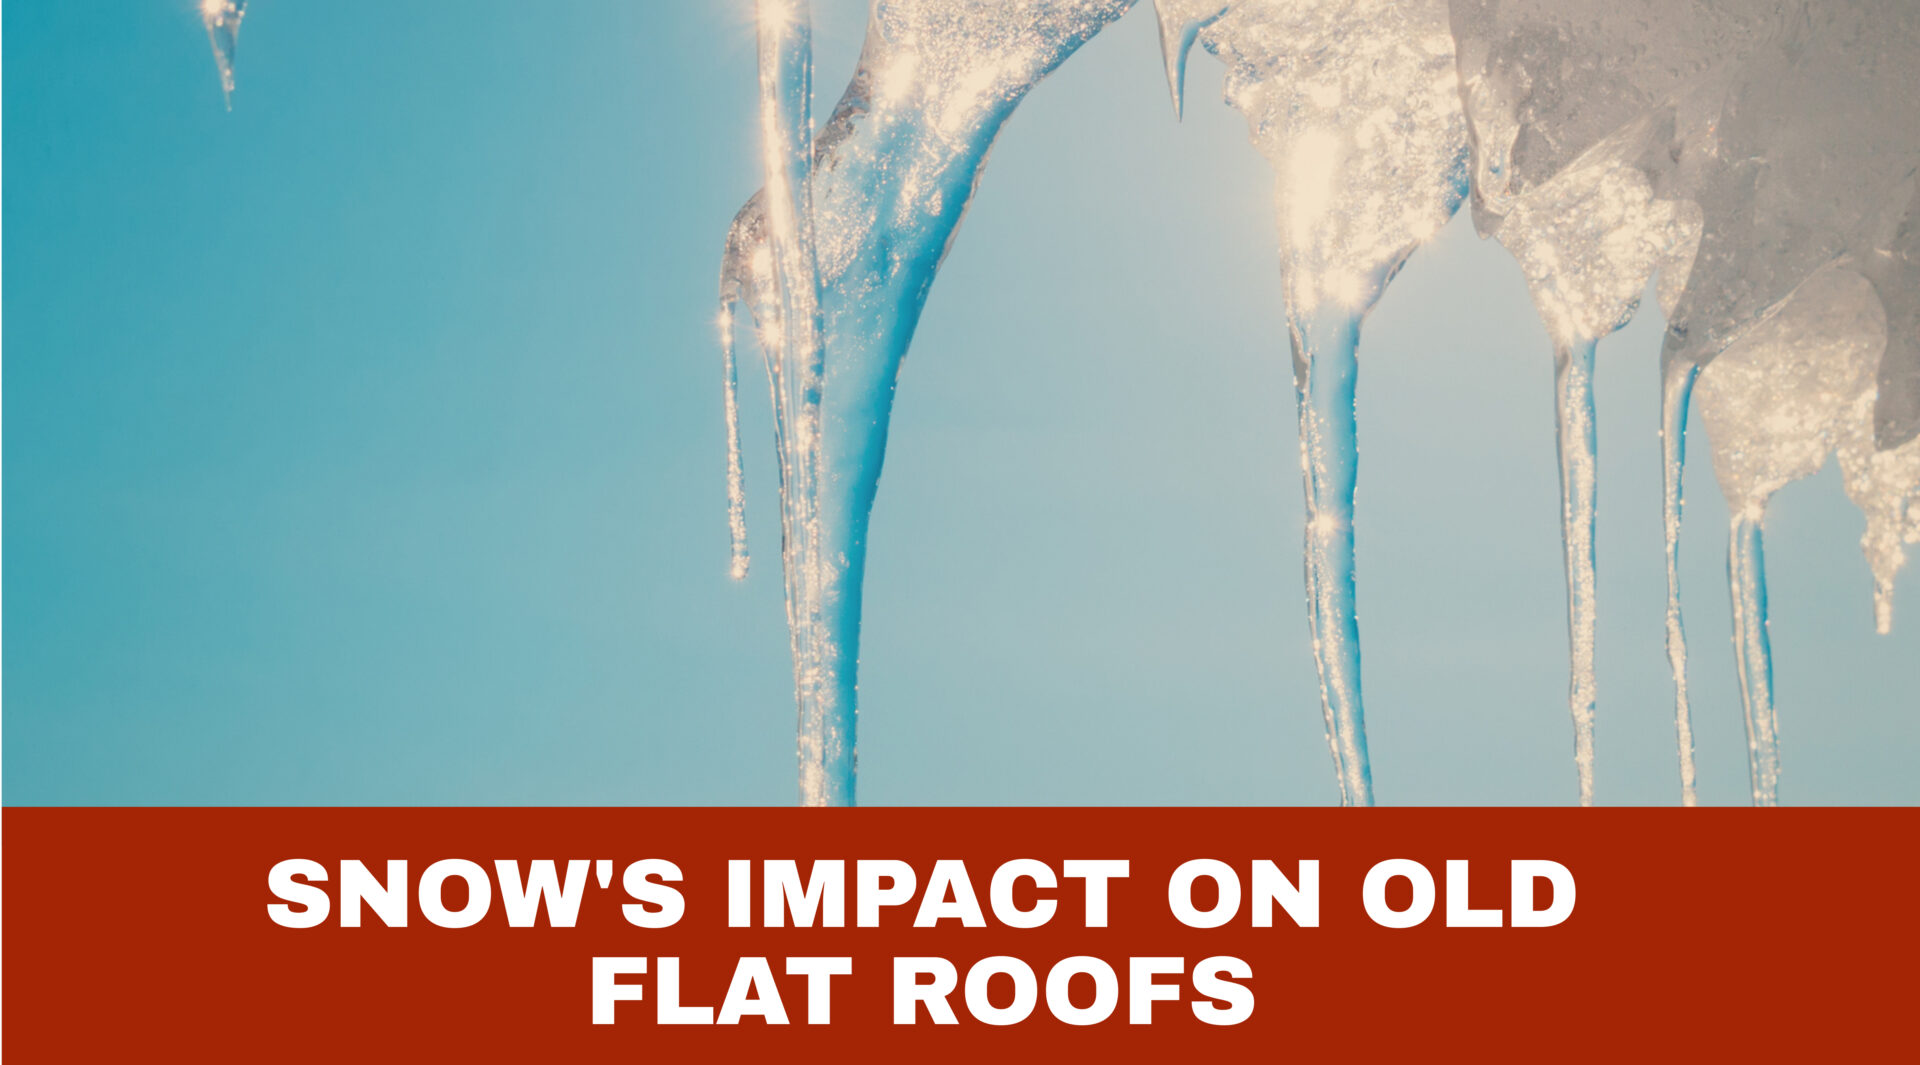 Shielding Your Roof: Snow's Impact on Old Flat Roofs and High-Tech Membrane Roofing's Winter-Ready Solutions